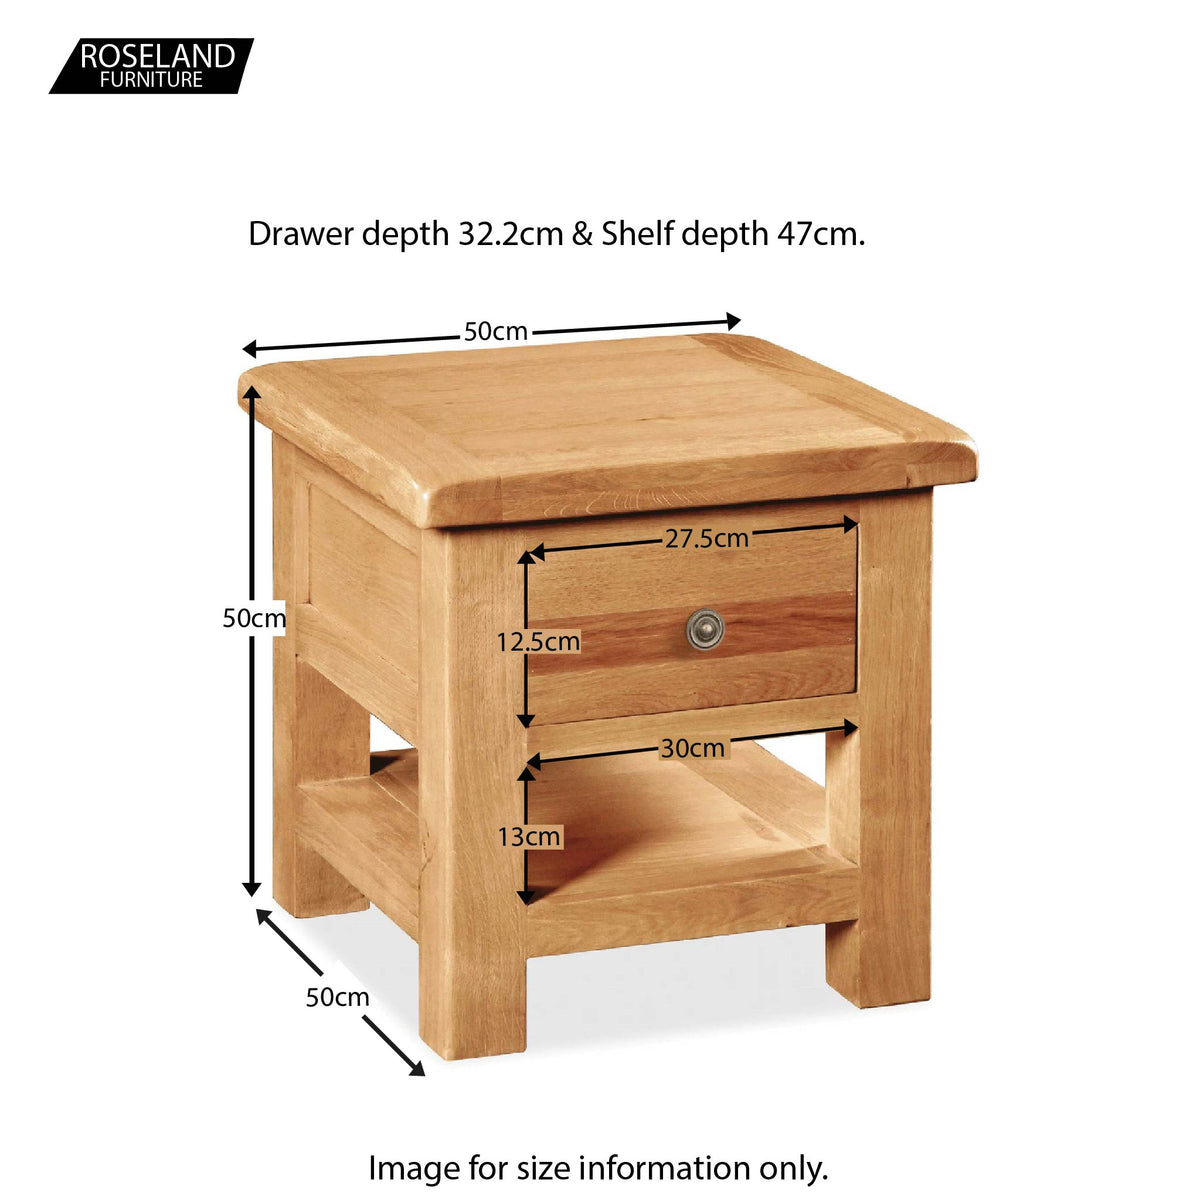 Sidmouth Oak Lamp Table - Size Guide